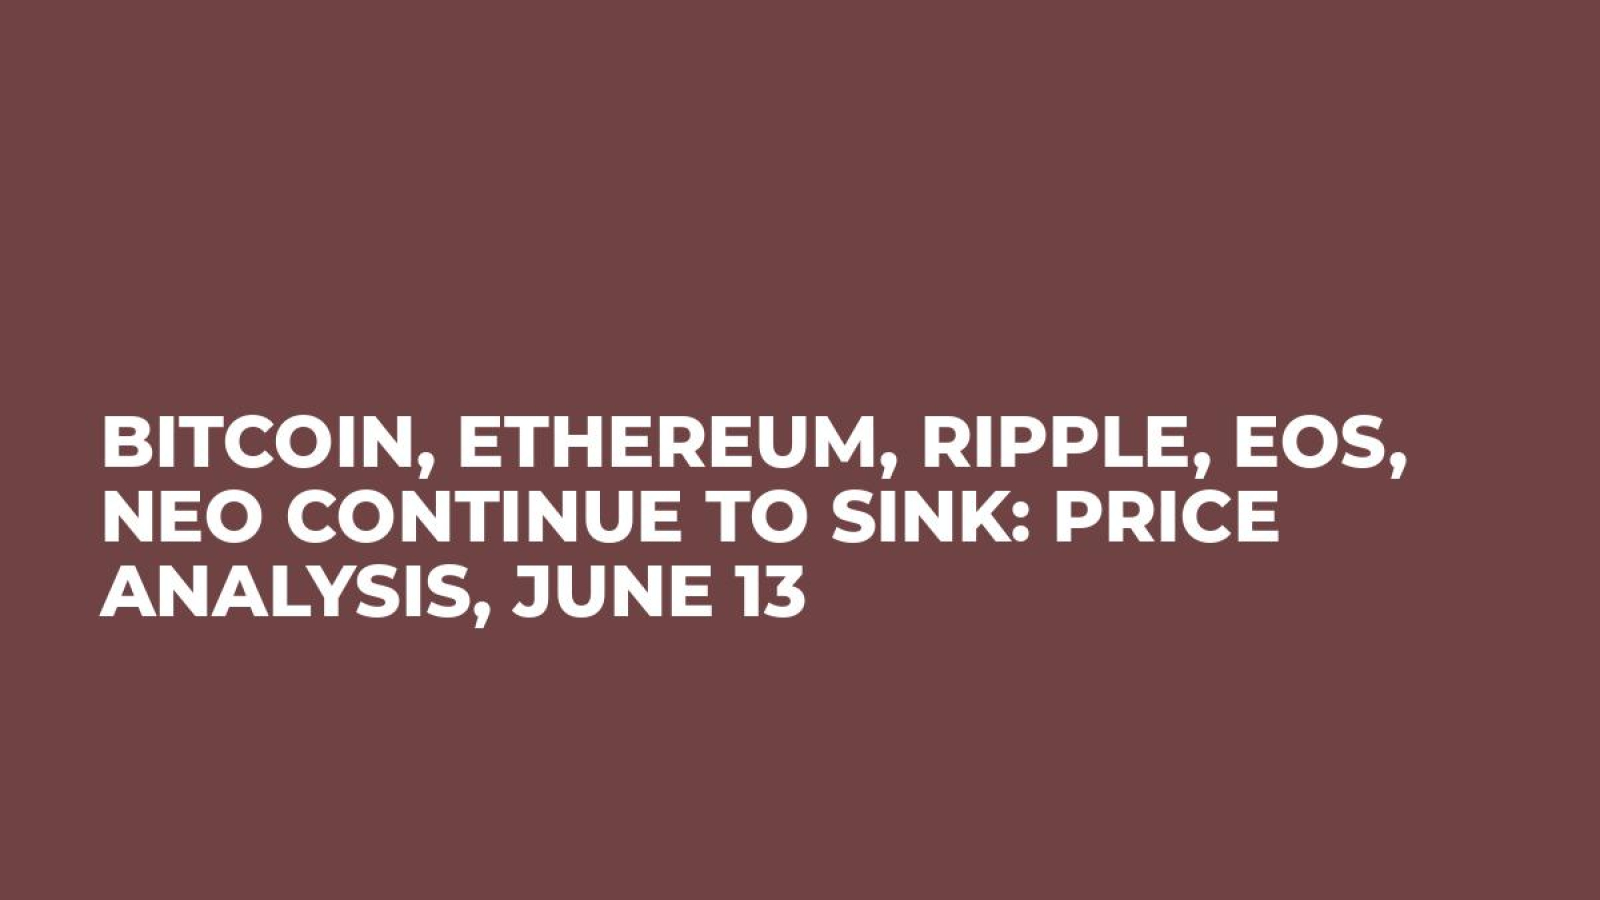 Bitcoin, Ethereum, Ripple, EOS, NEO Continue to Sink: Price Analysis, June 13